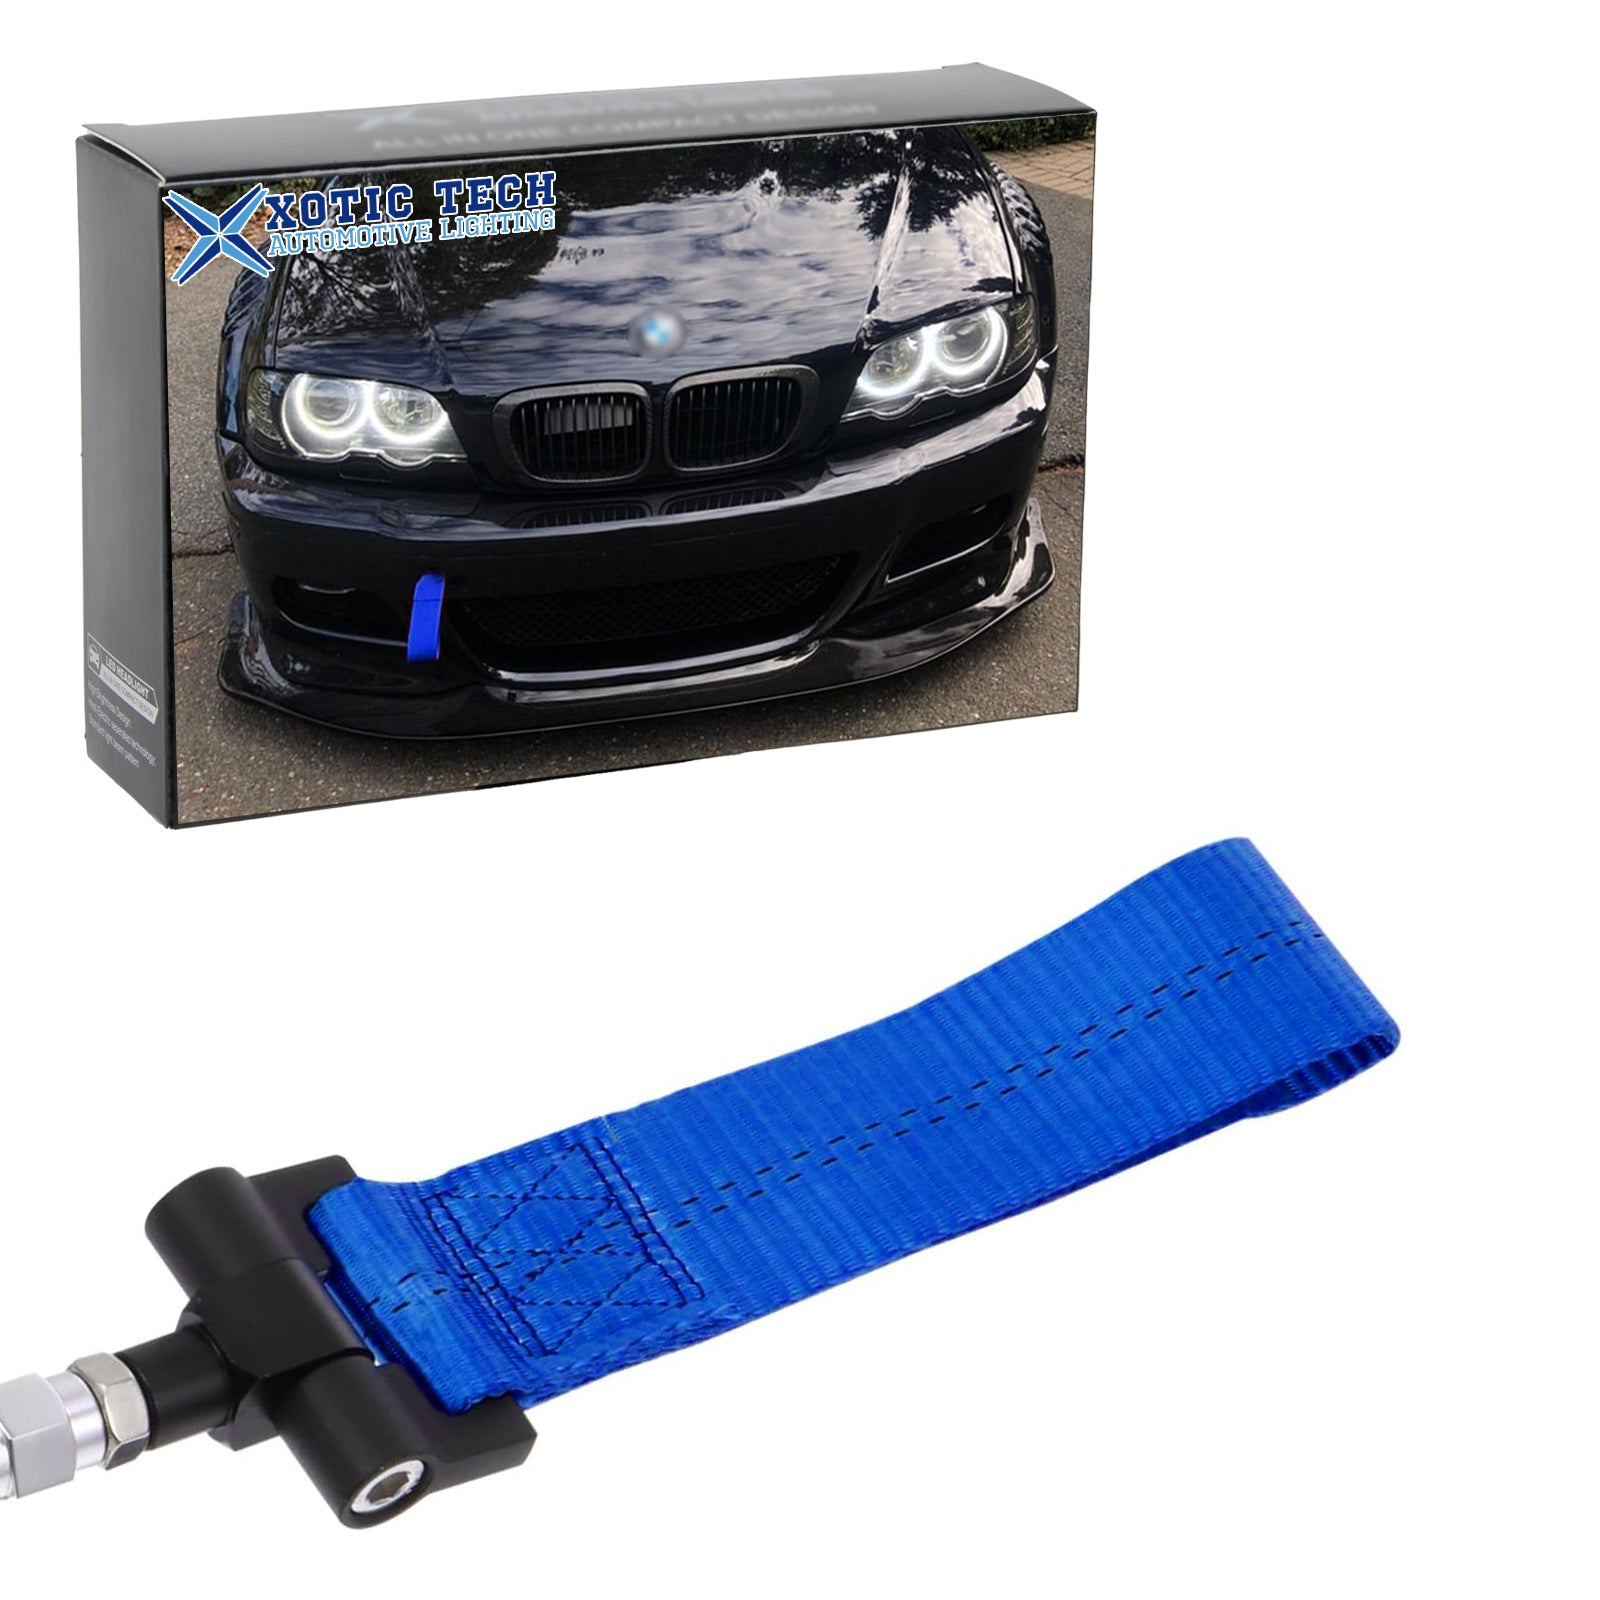 Red / Blue / Black JDM Style Tow Hole Adapter with Towing Strap for BM